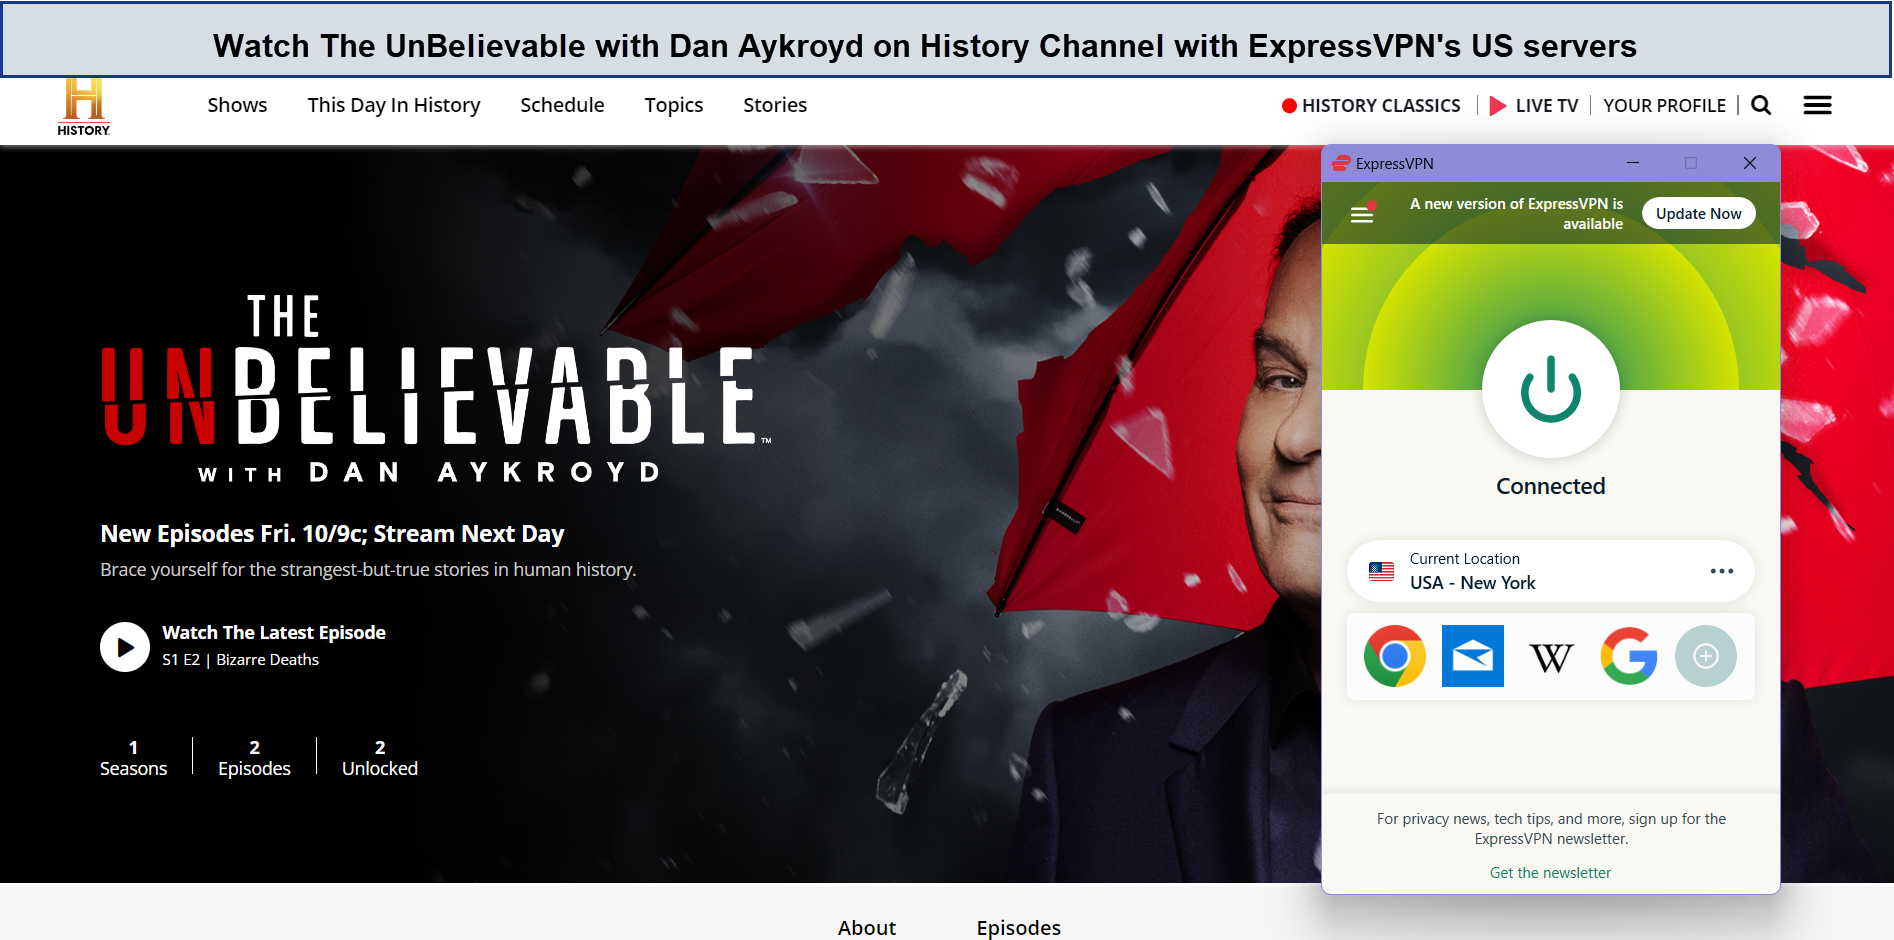 Watch-The-UnBelievable-with-Dan-Aykroyd-on-History-Channel-with-ExpressVPN-in-Japan